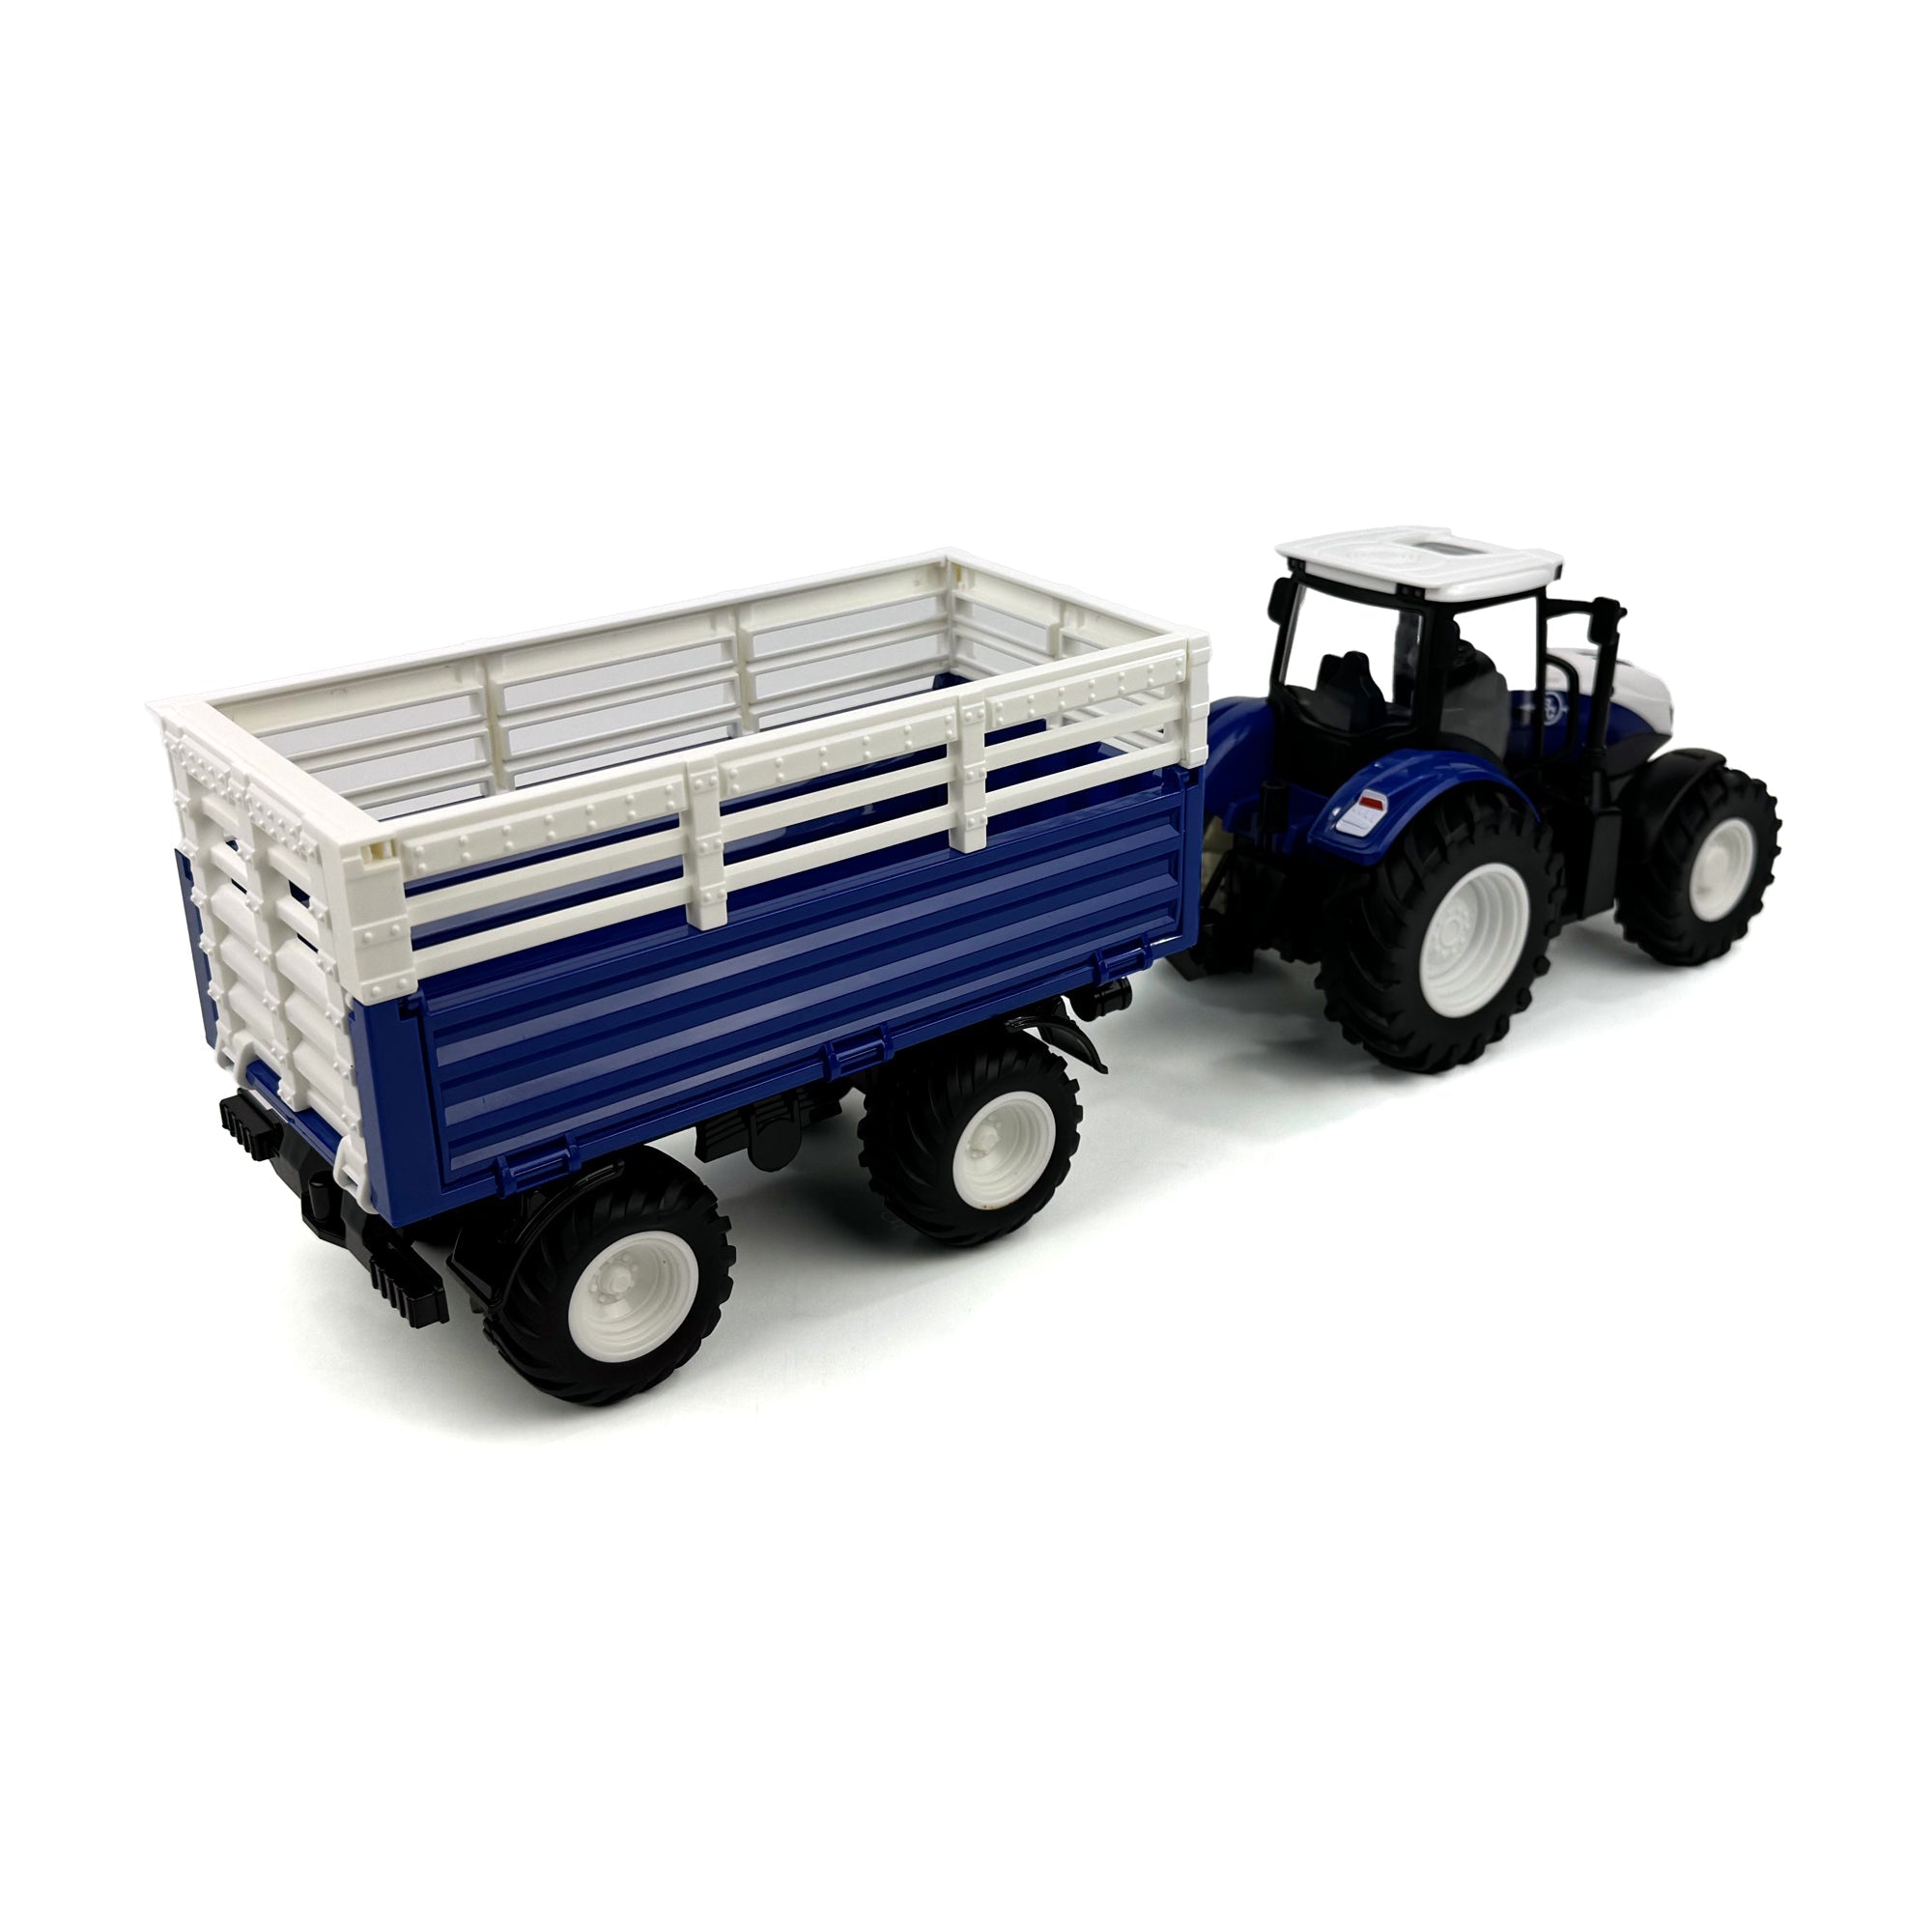 1:24 Scale R/C Tractor & Trailer Combo